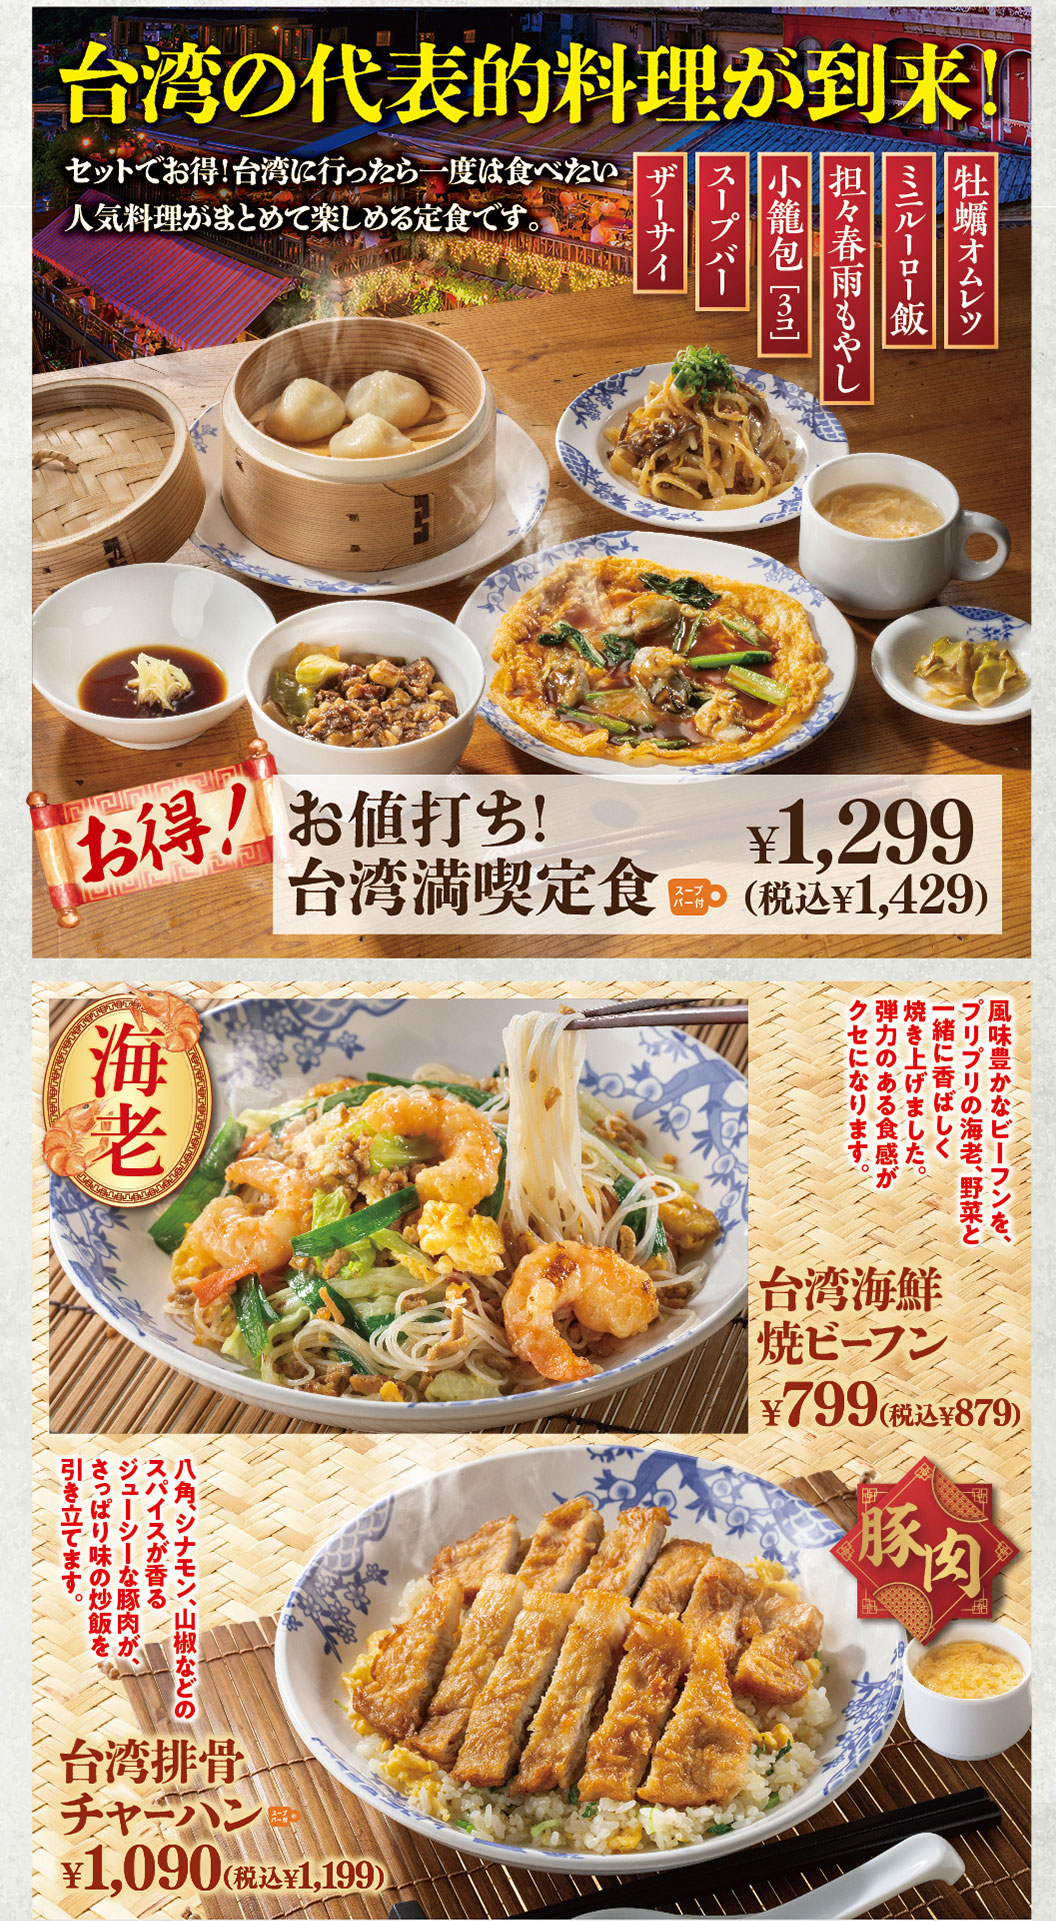 Great value! Full Taiwanese Combo Meal Taiwanese Seafood Fried Vermicelli Taiwanese pork rib Fried rice